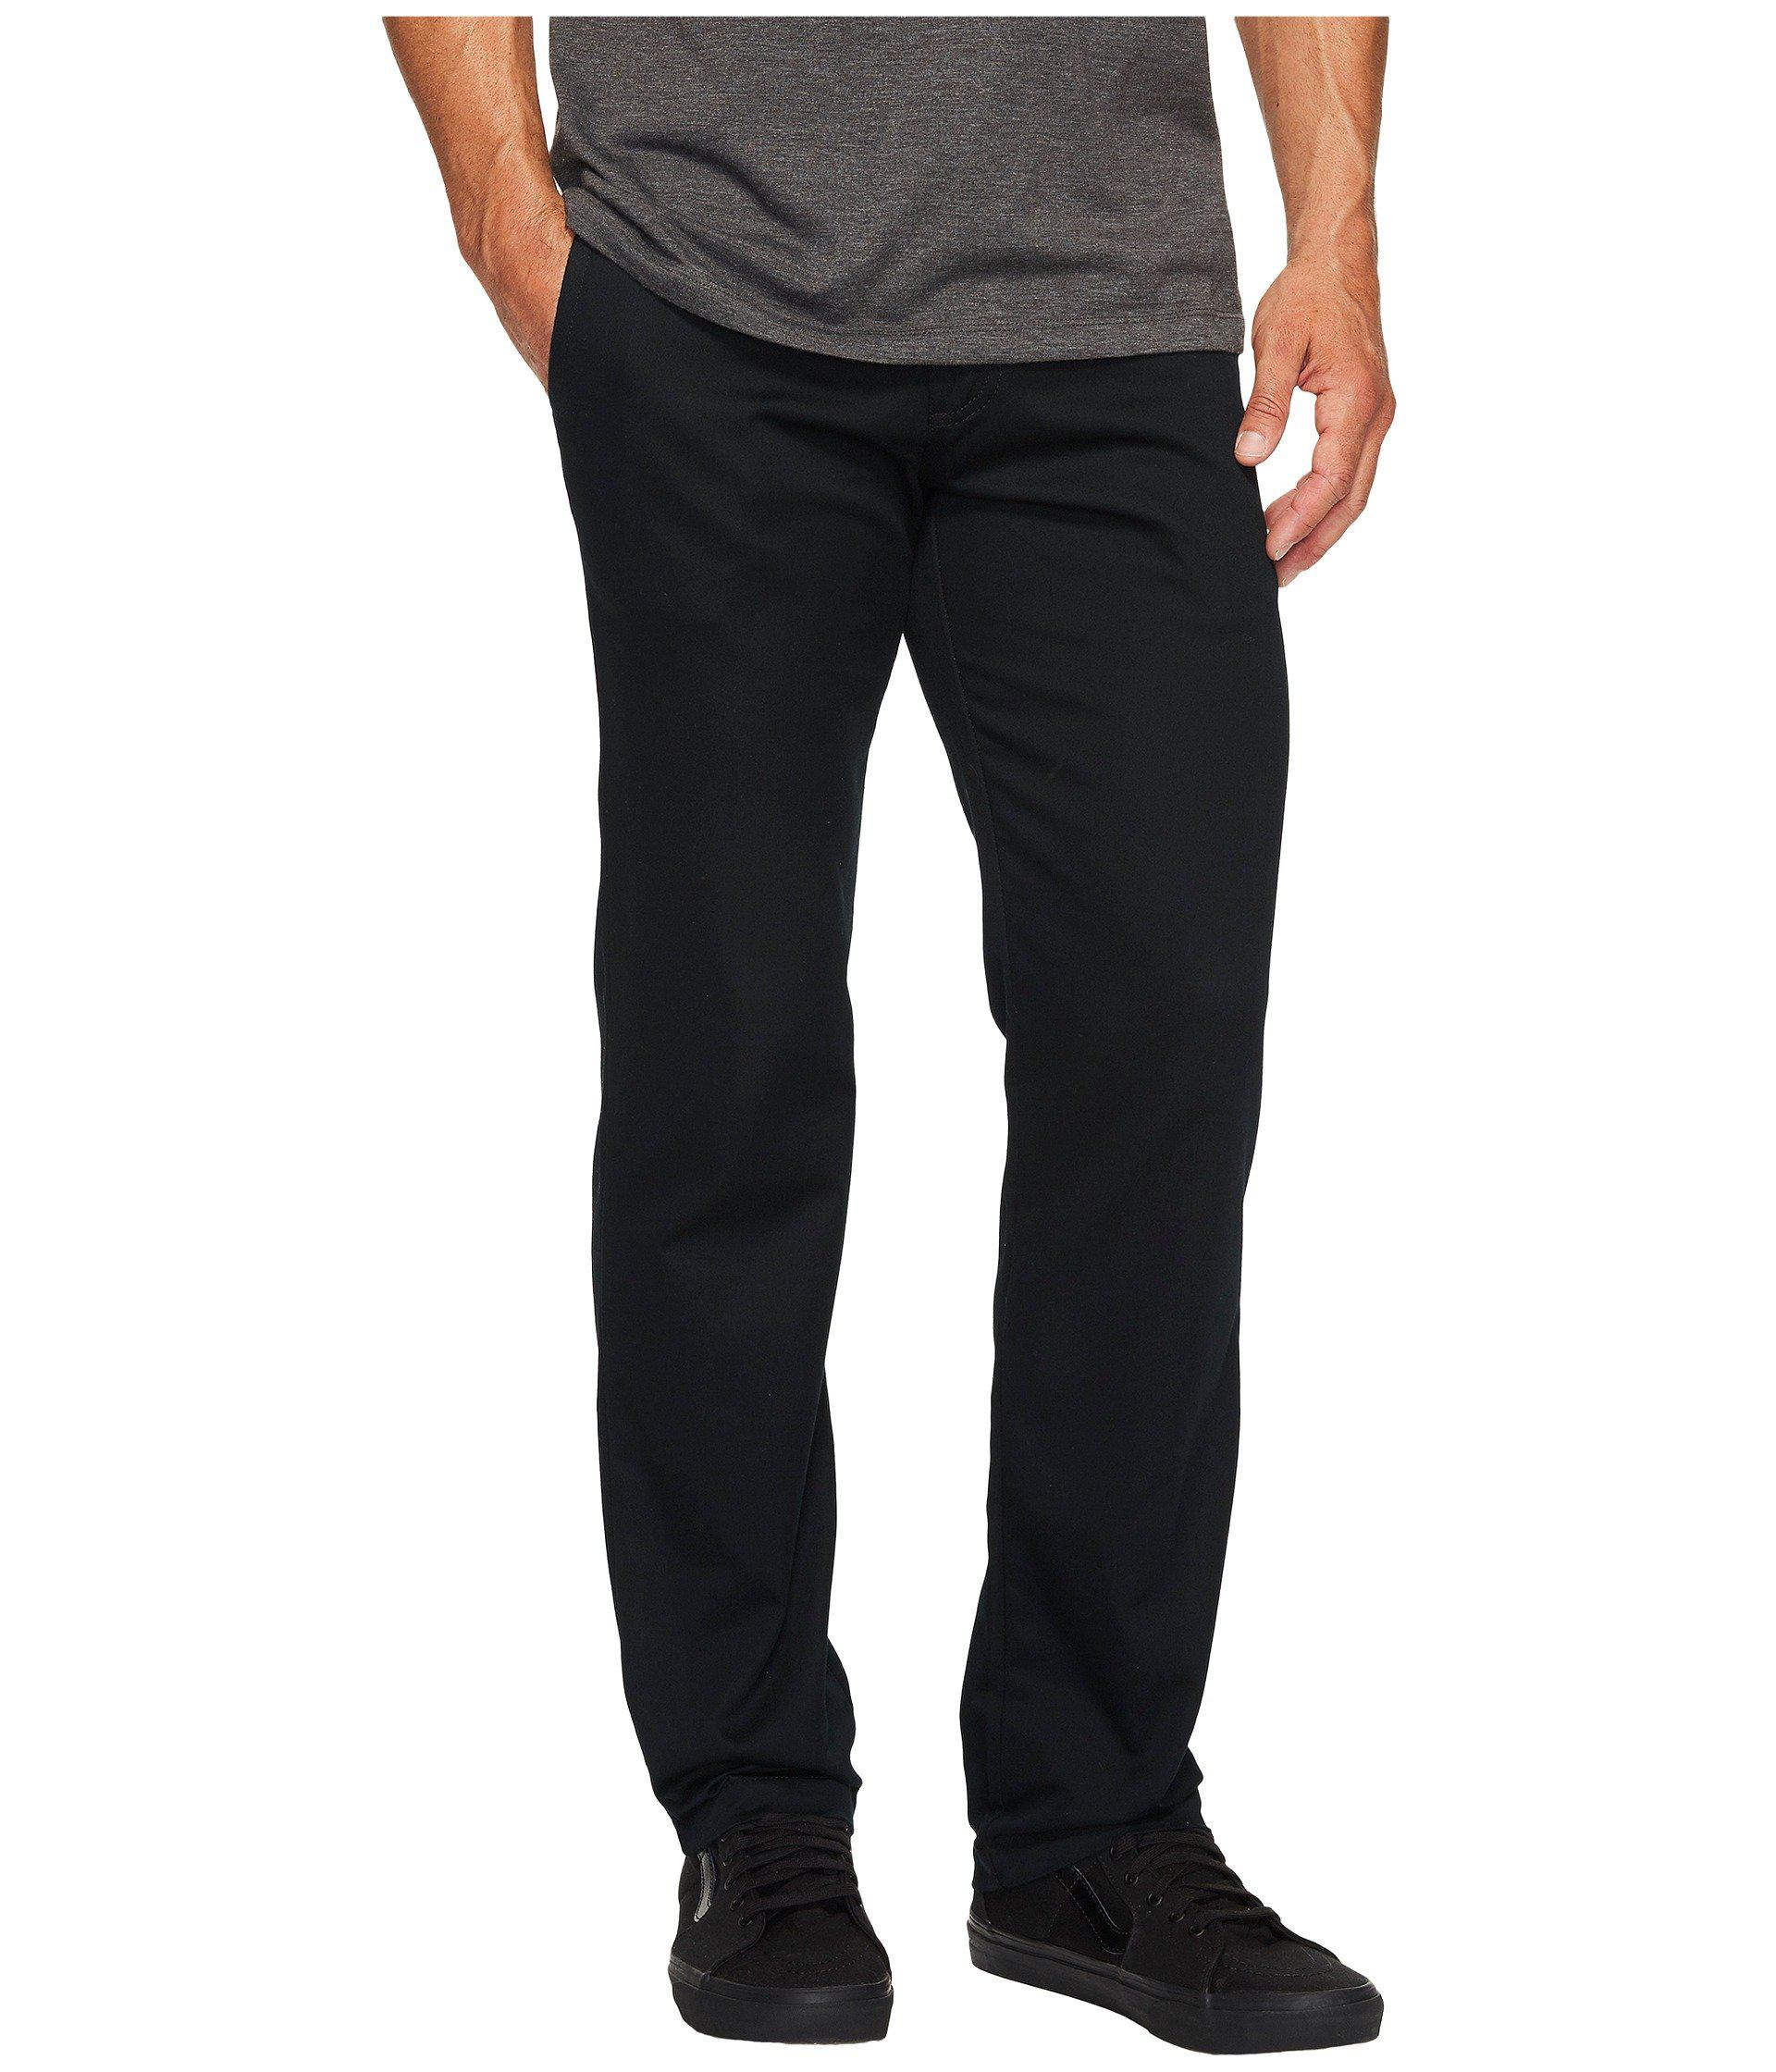 Vans Cotton Authentic Stretch Chino Pants in Black for Men - Lyst